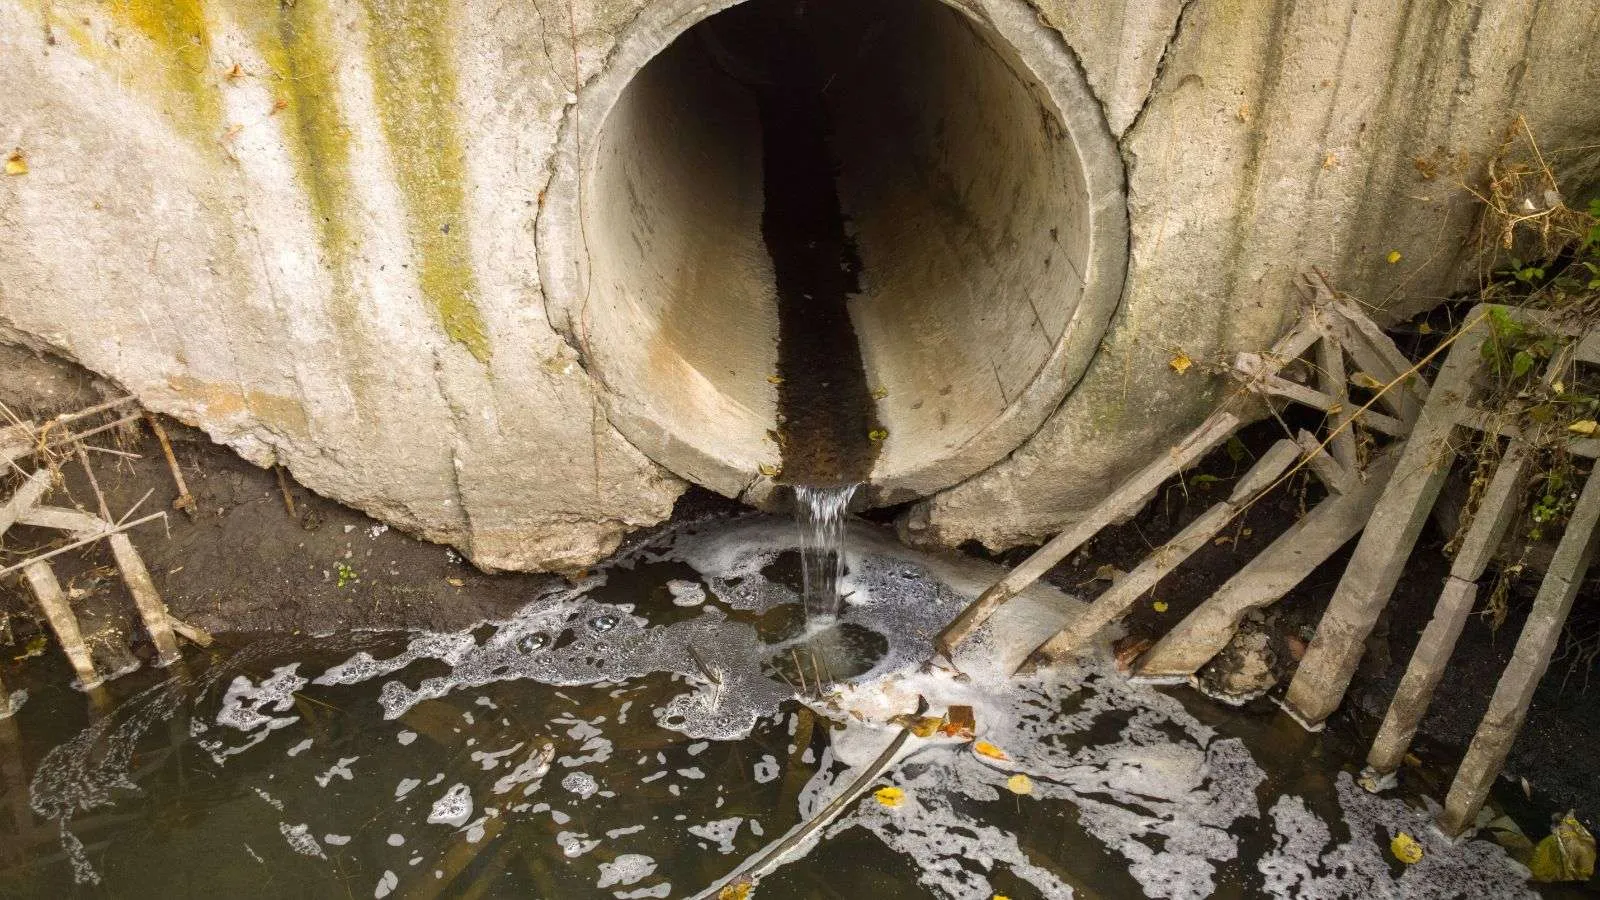 Sewer problem affecting the home - bighomeprojects.com